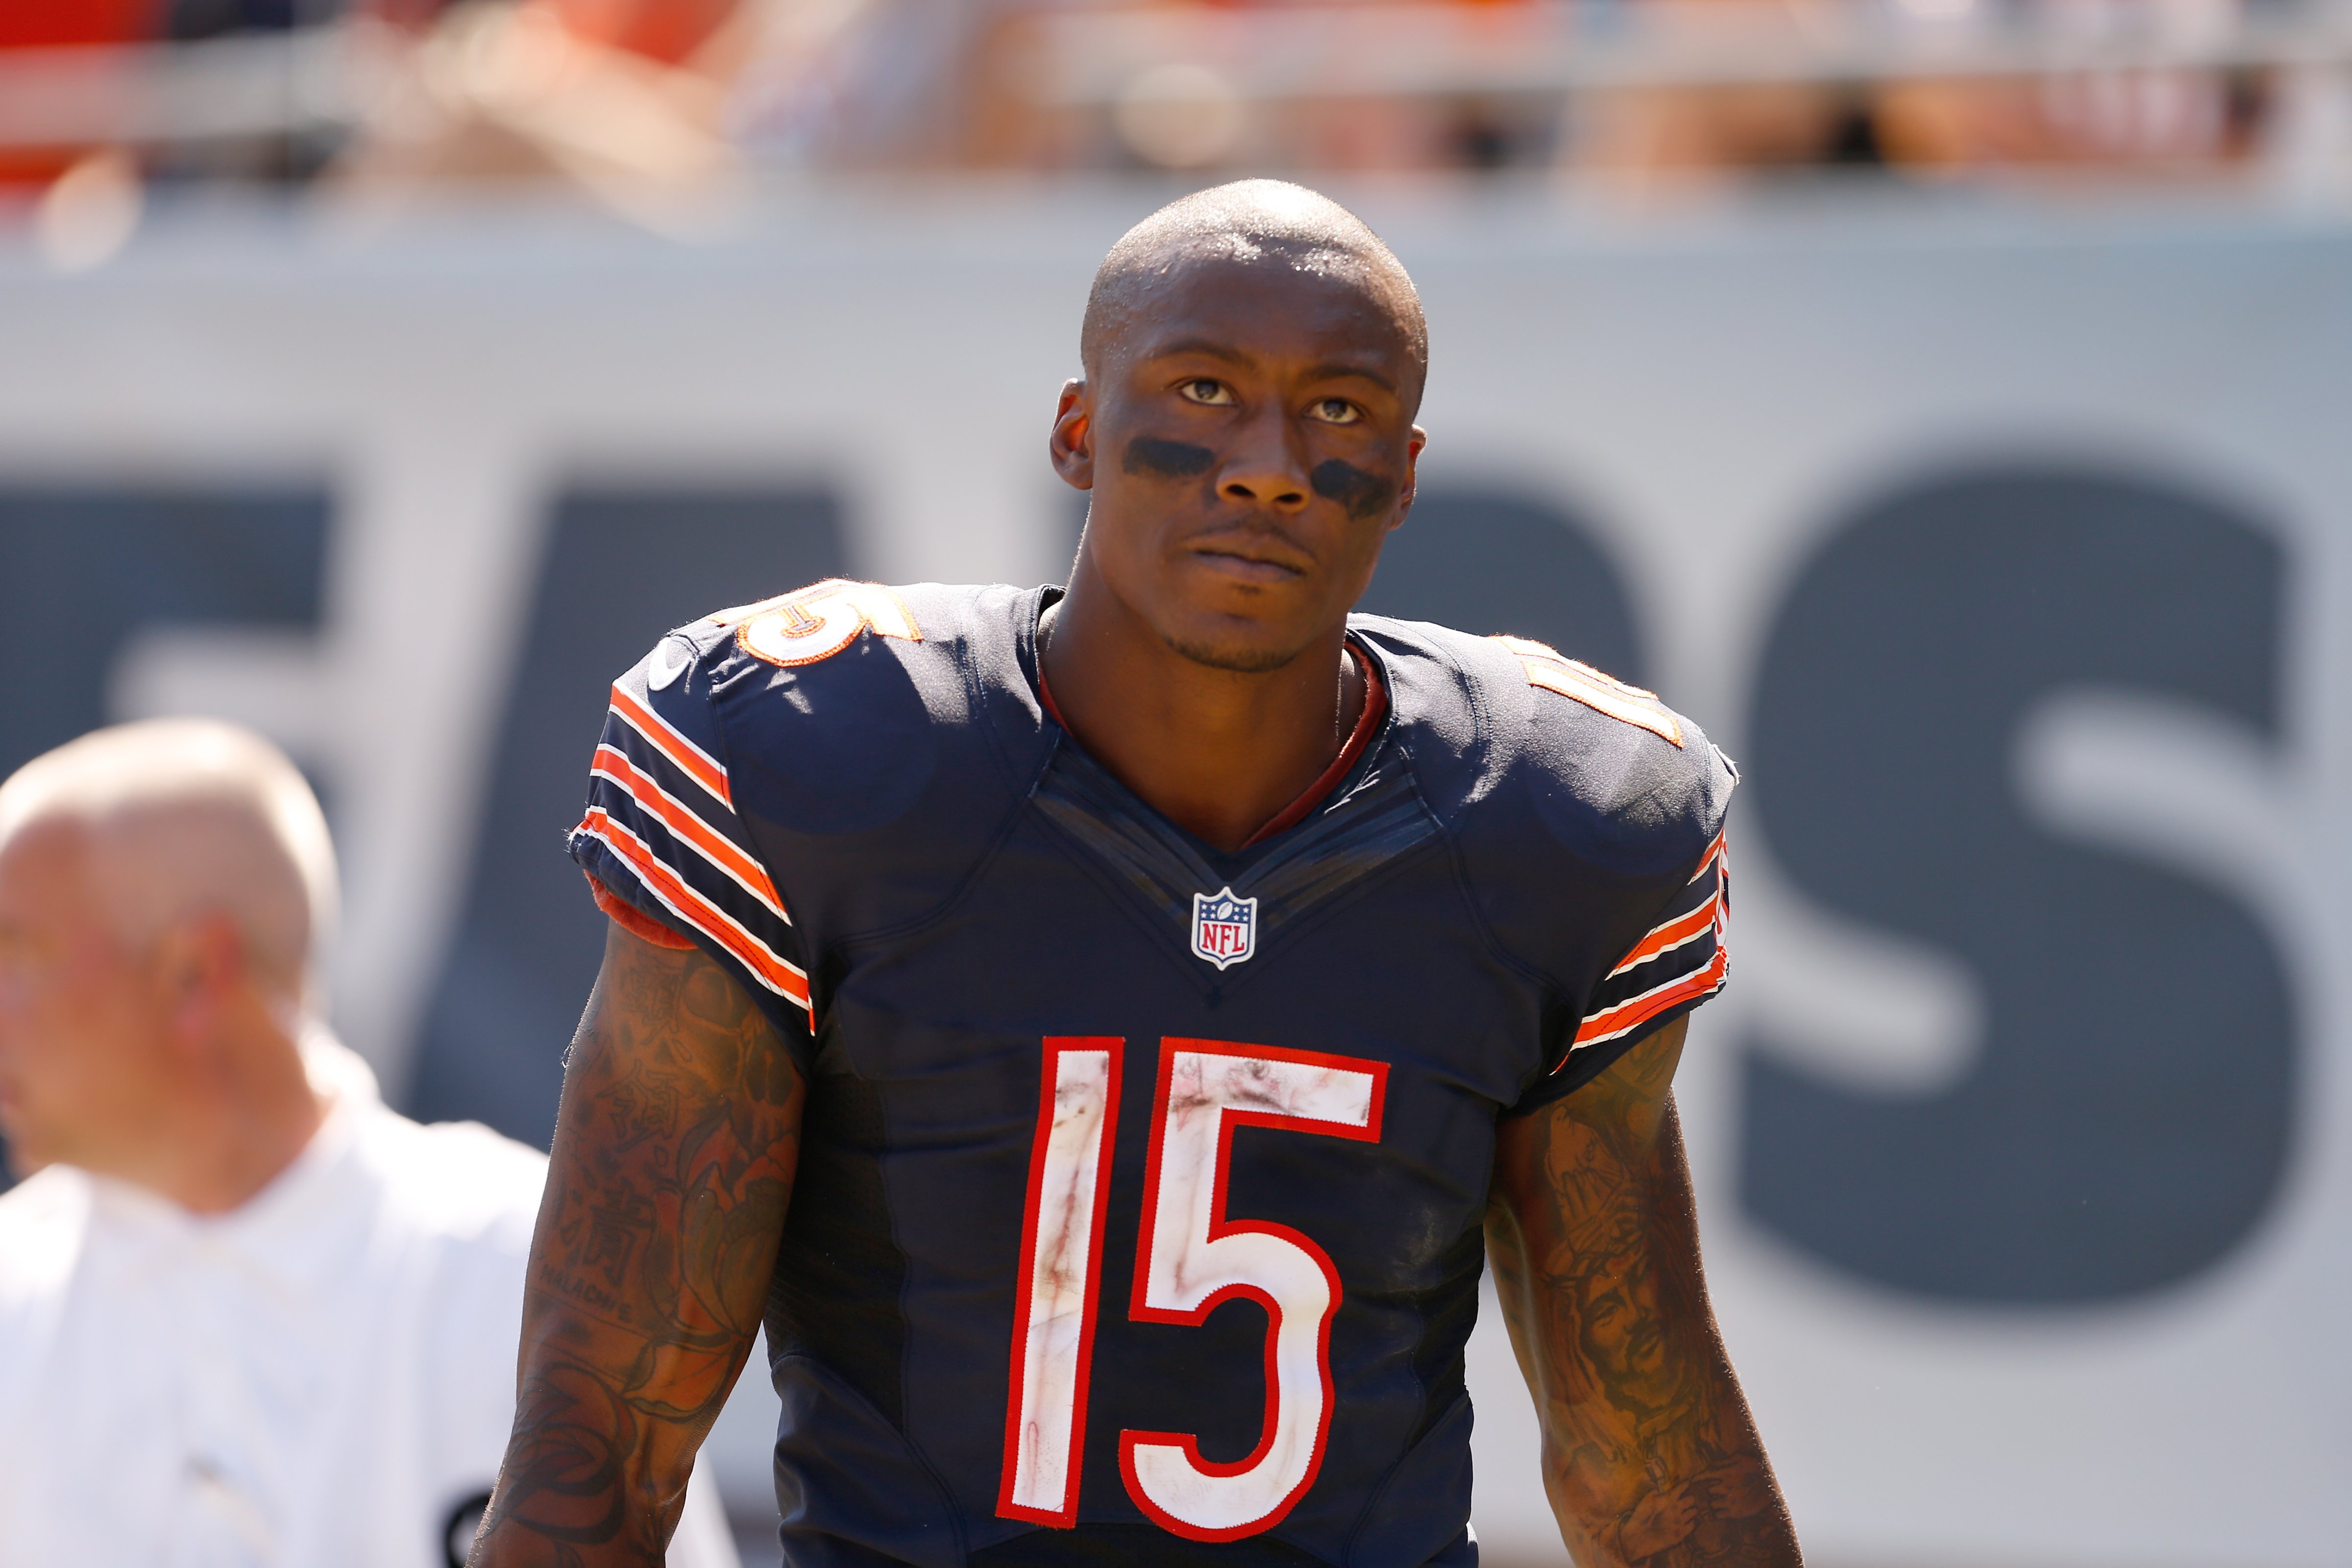 Chicago Bears wide receiver Brandon Marshall looks on from the sidelines during a game against the Buffalo Bills in Chicago on Sept. 7, 2014. (Scott Boehm—AP)